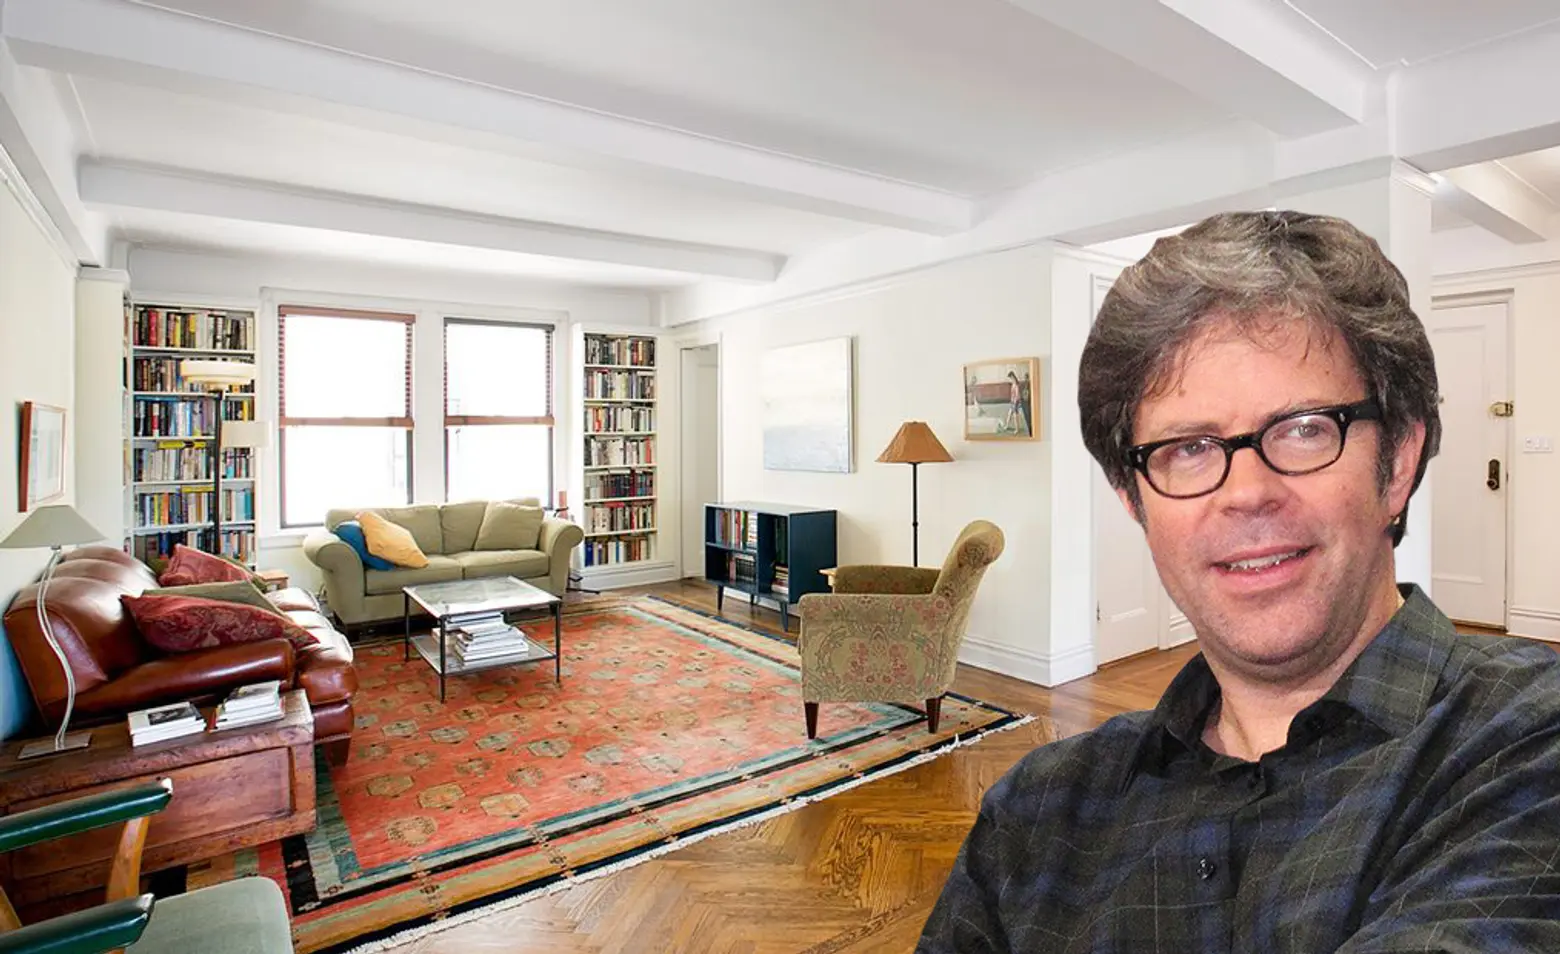 Jonathan Franzen closes the chapter on his $2M Upper East Side co-op